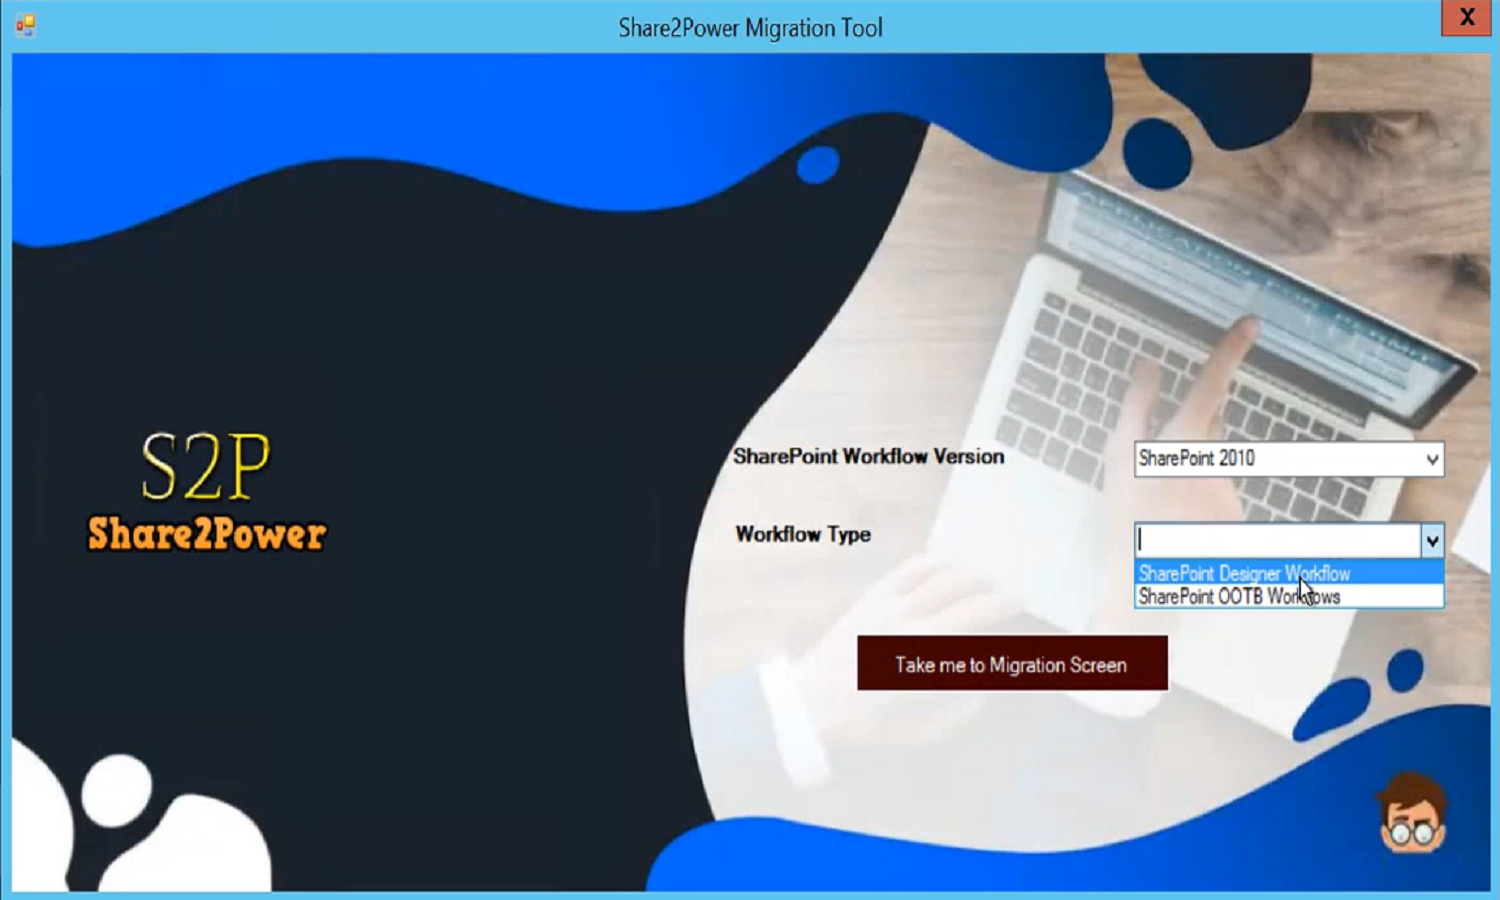 SharePoint Workflow to Power Automate Migration Tool